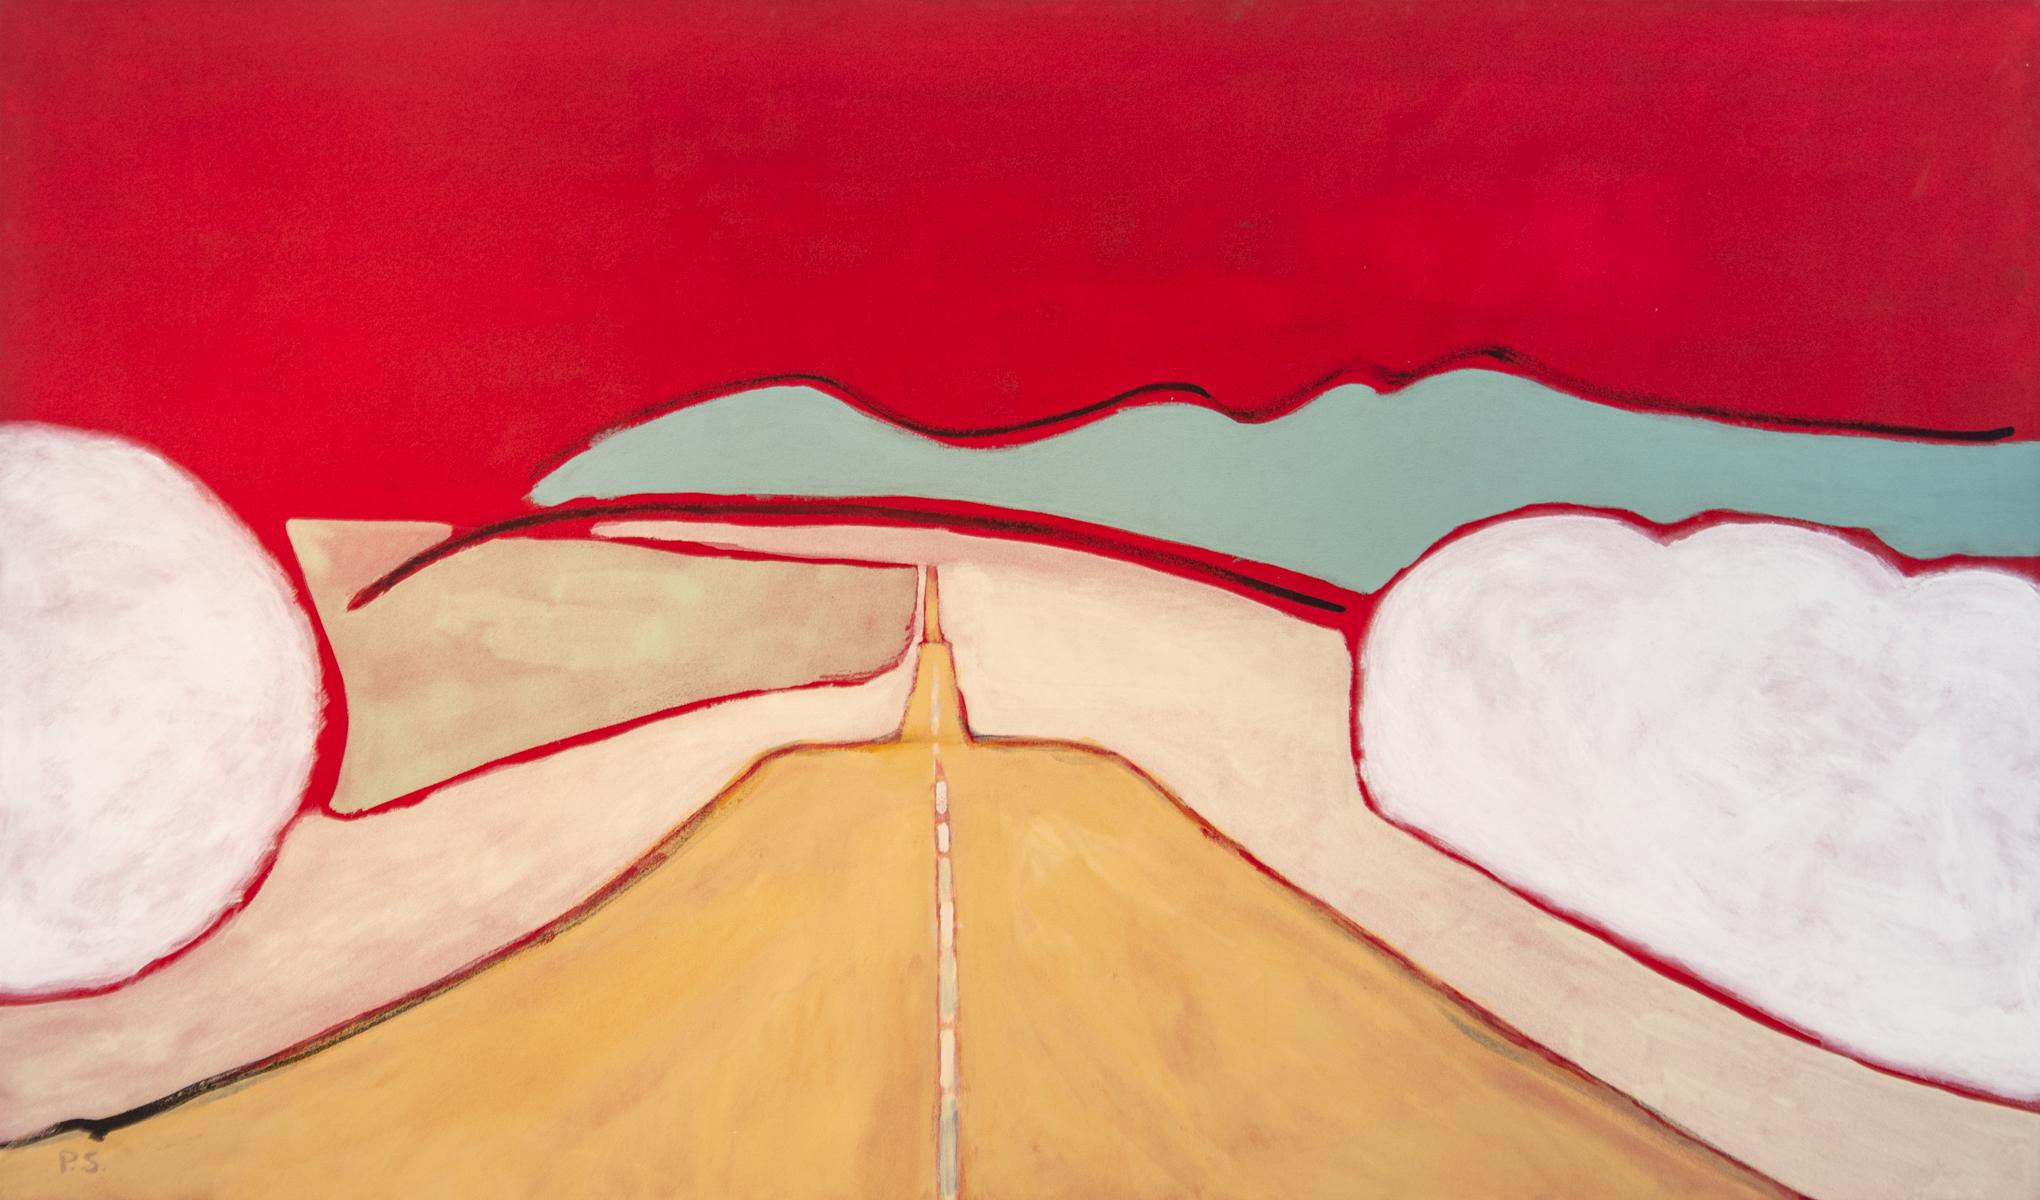 Big Red Trip - large, bright, colorful, abstracted landscape, acrylic on canvas - Painting by Pat Service